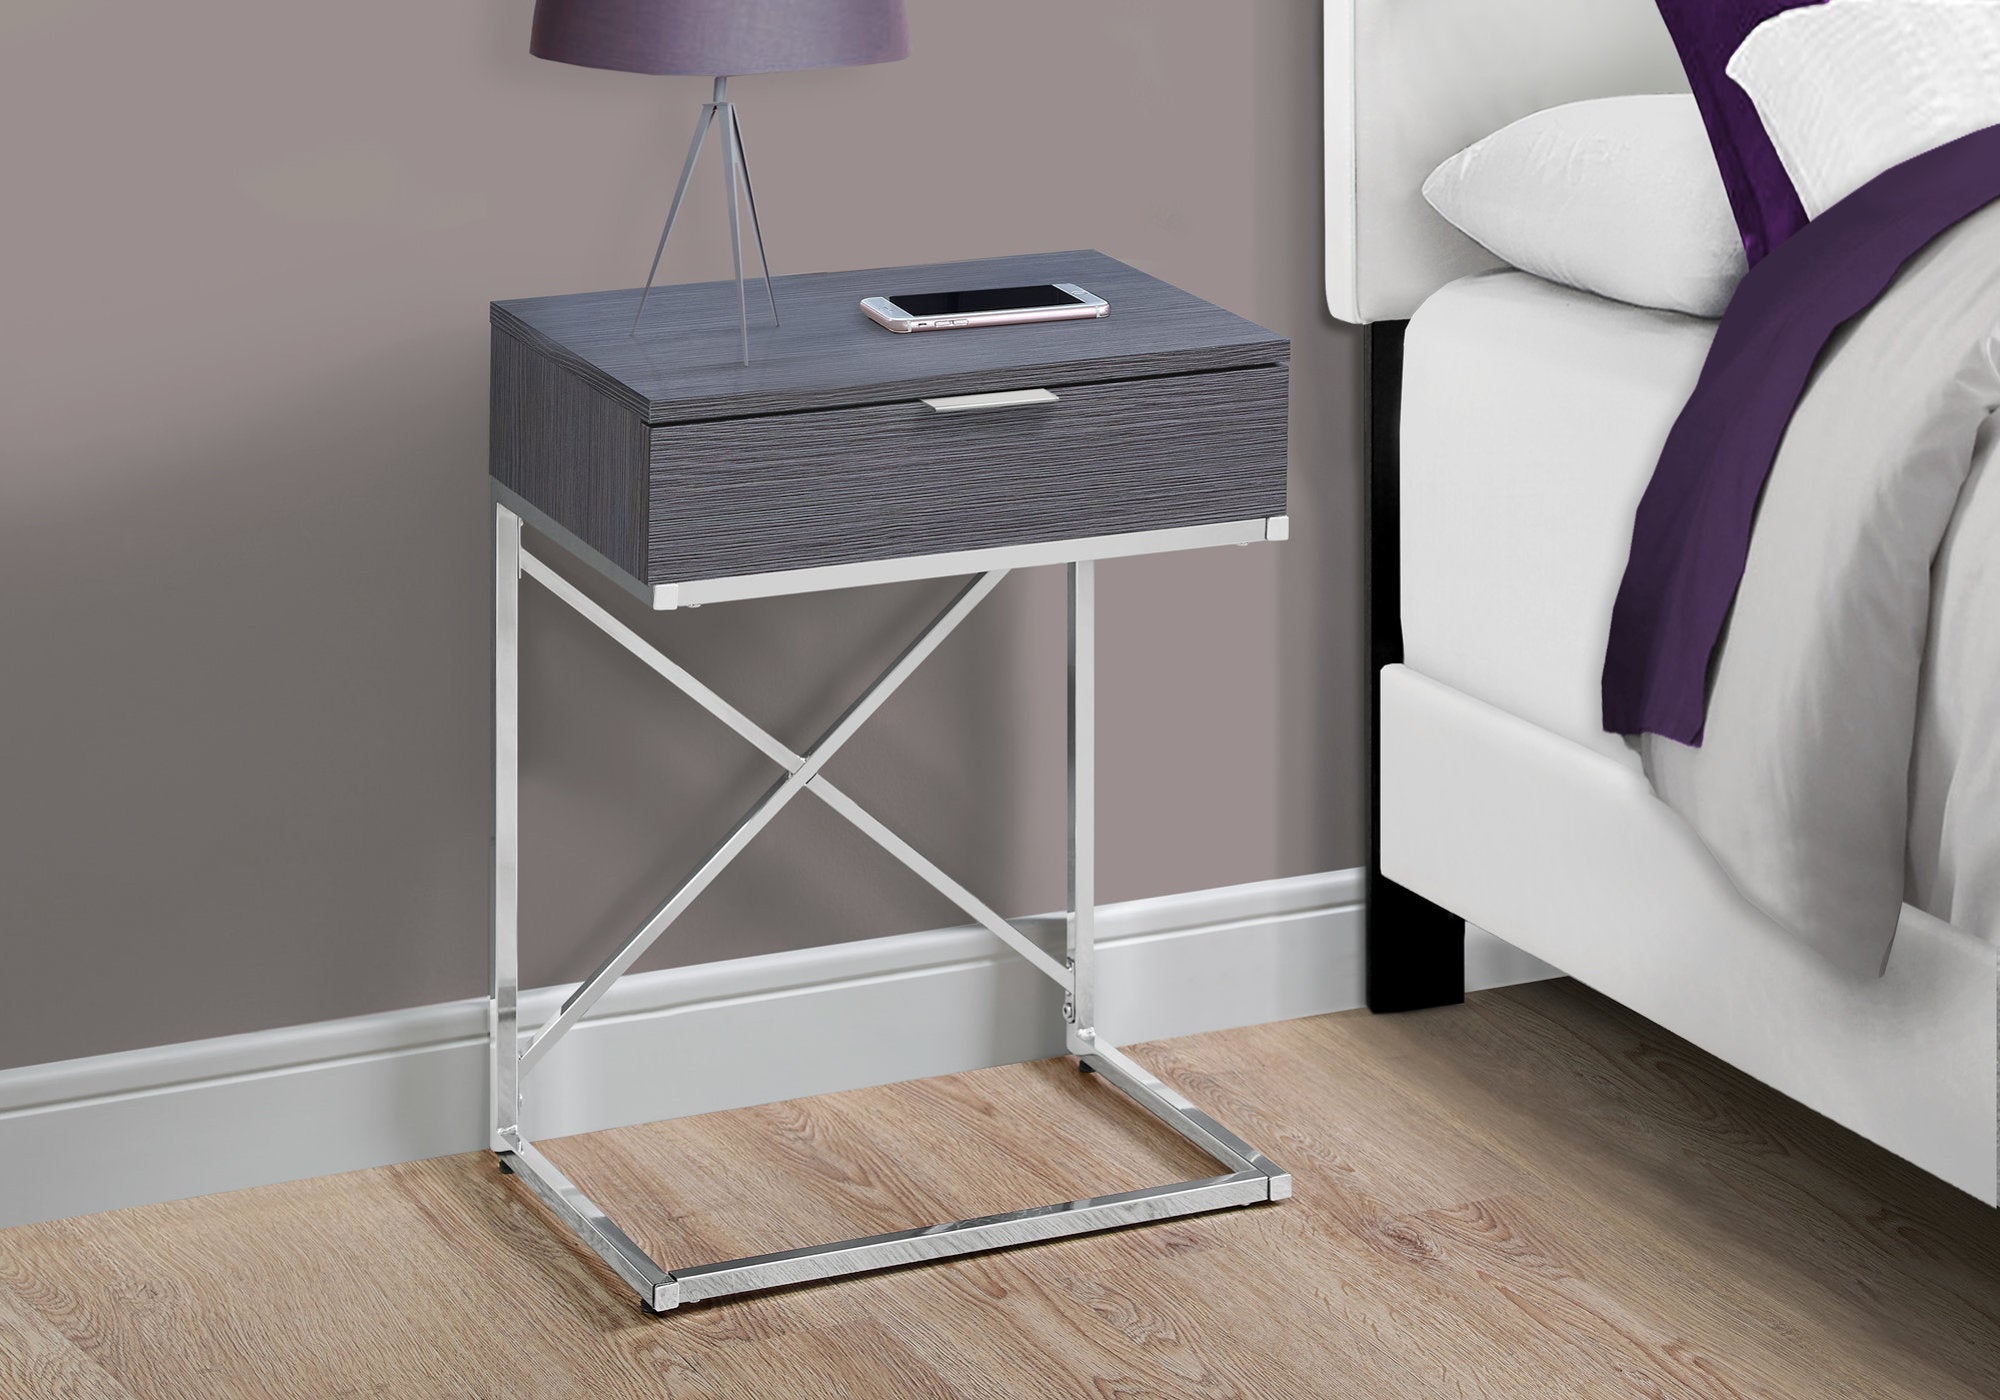 MN-833474    Accent Table, Side, End, Nightstand, Lamp, Living Room, Bedroom, Metal Legs, Laminate, Grey, Chrome, Contemporary, Modern